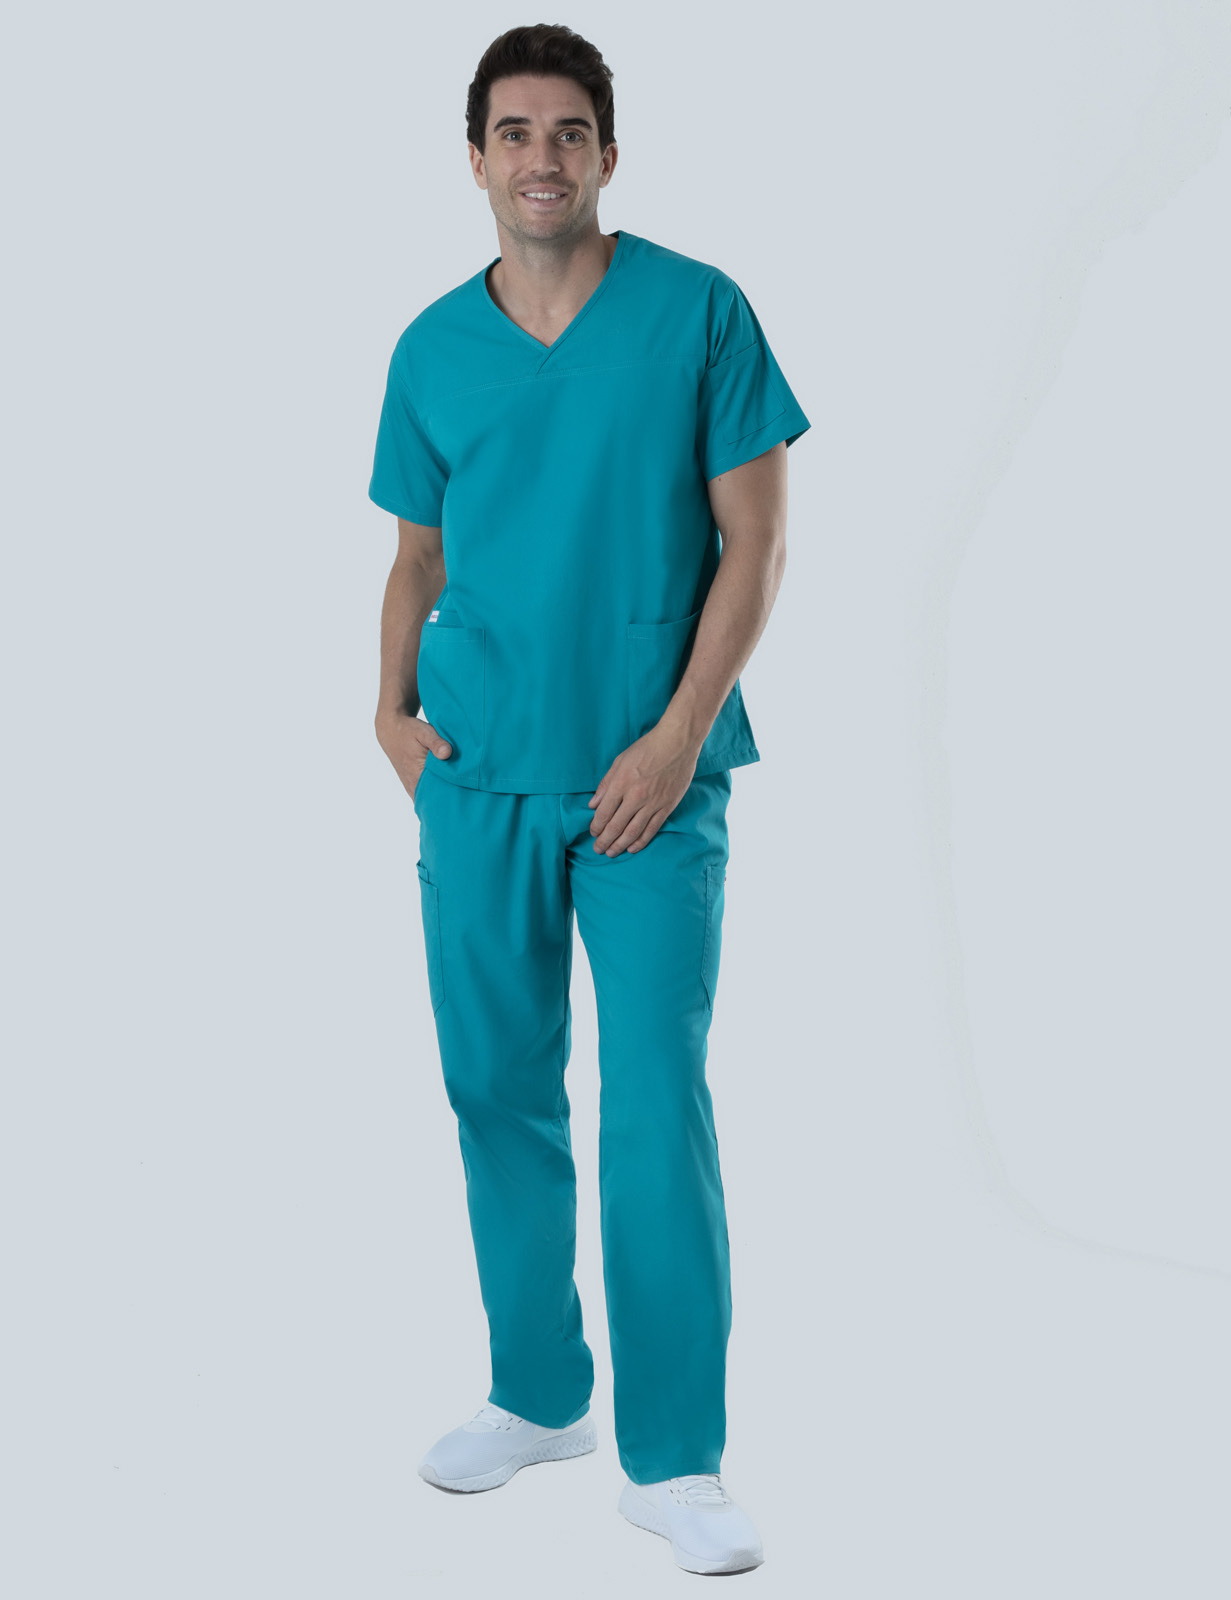 ECT Anaesthetic Technician Uniform Set Bundle (Men's Fit Solid Top and Cargo Pants in Teal + Logos)